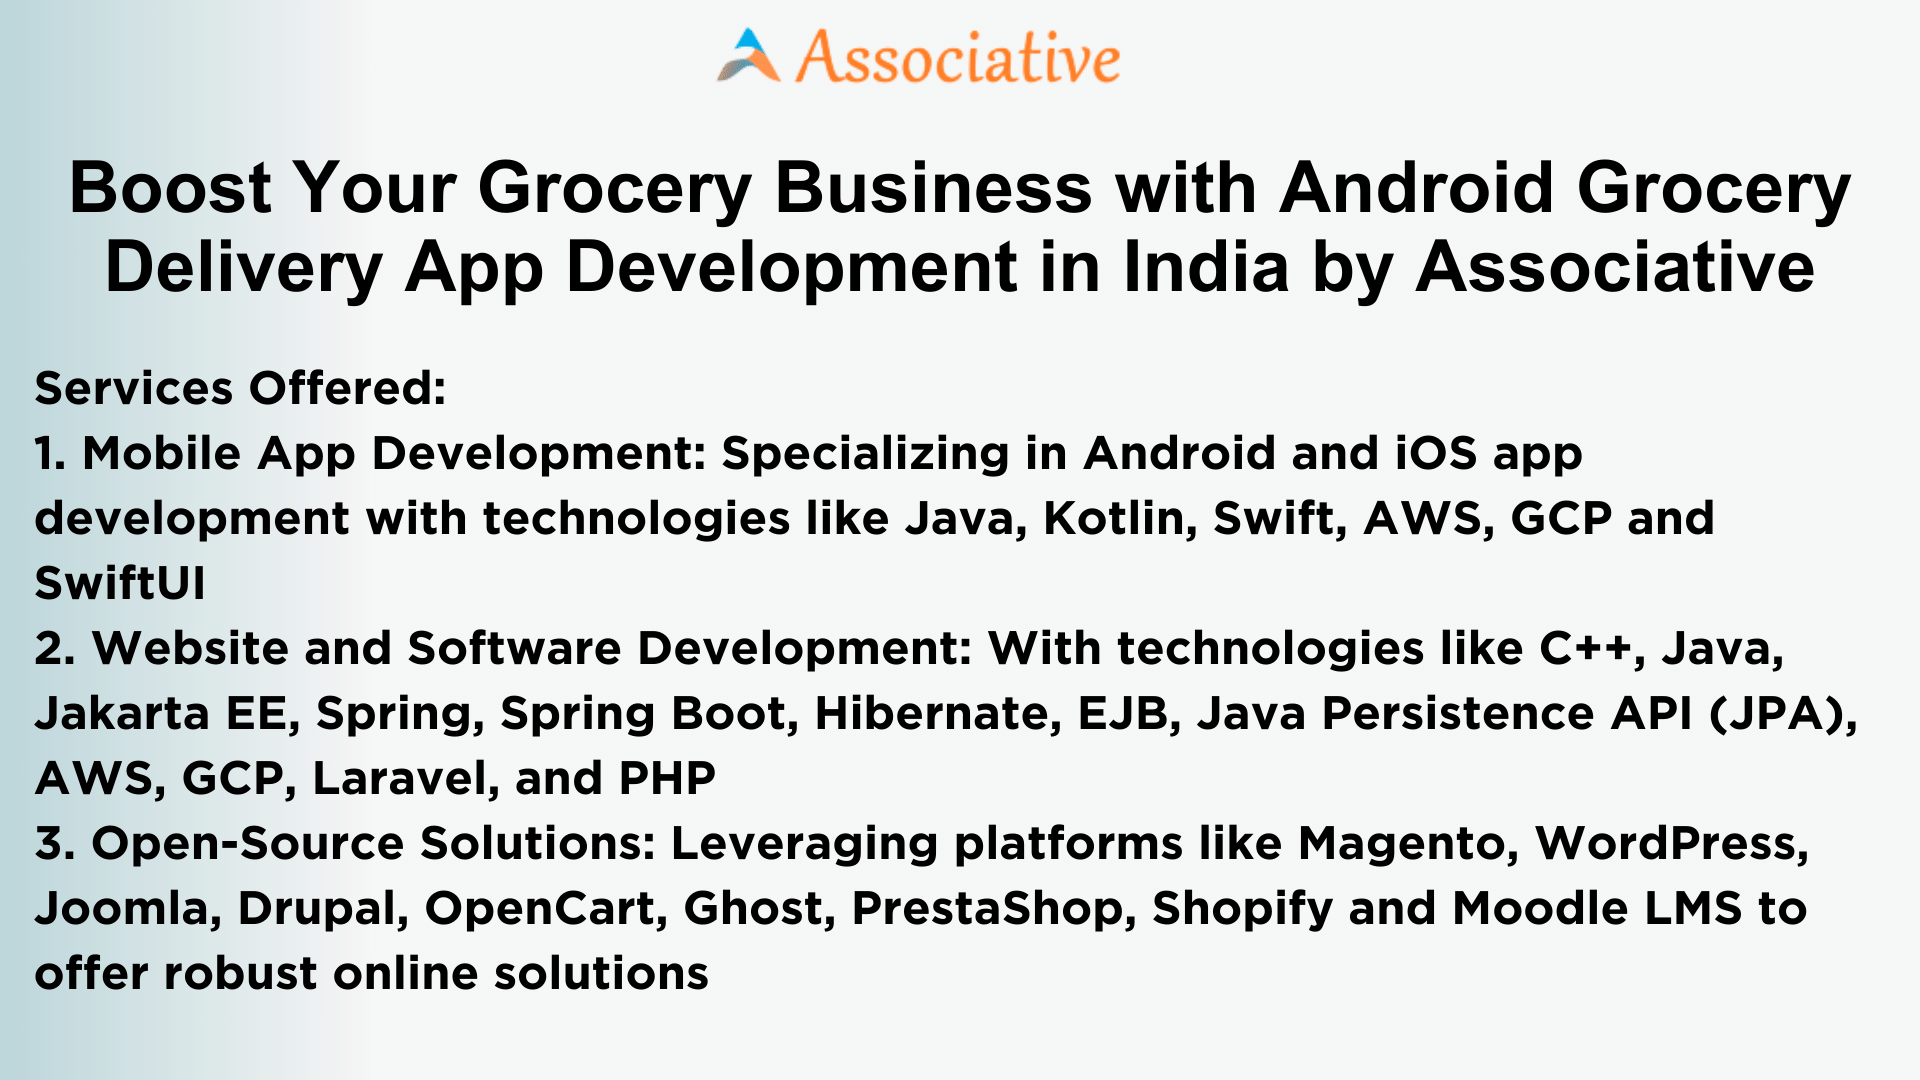 Boost Your Grocery Business with Android Grocery Delivery App Development in India by Associative